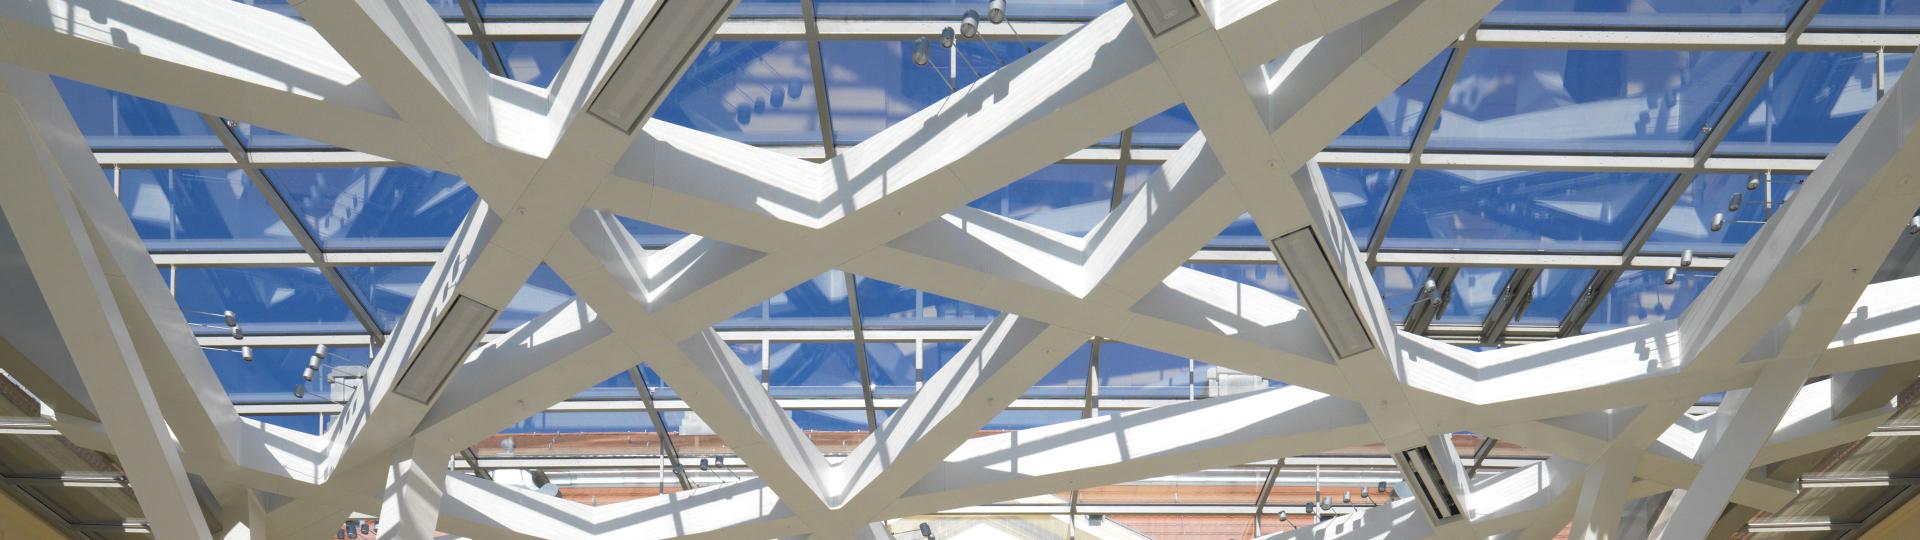 Ceiling of the Glass Courtyard against the blue sky